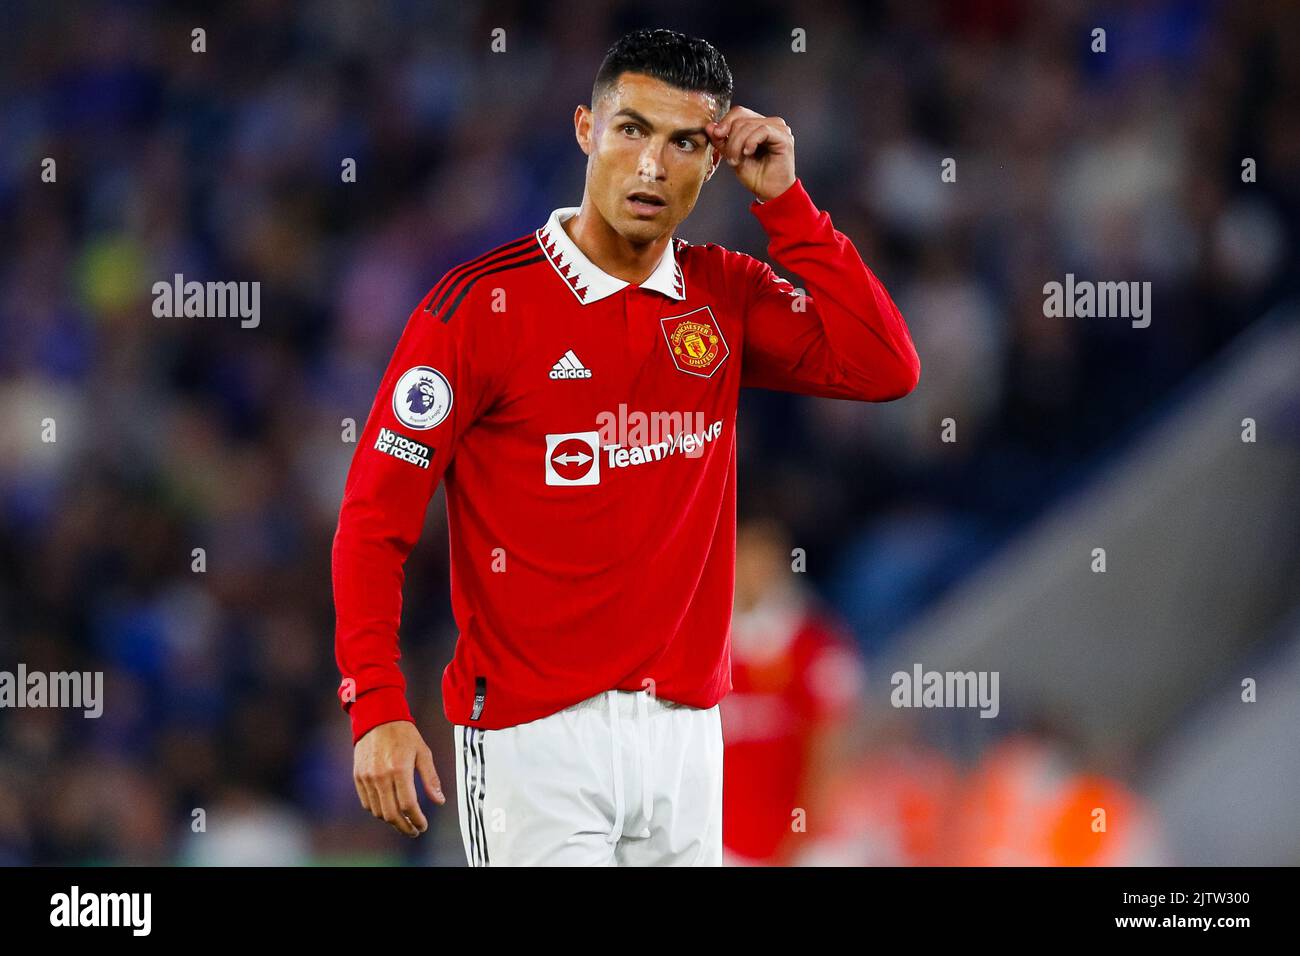 1st September 2022; The King Power Stadium, Leicester, Leicestershire, England;  Premier League Football, Leicester City versus Manchester United; Cristiano Ronaldo of Manchester United Stock Photo